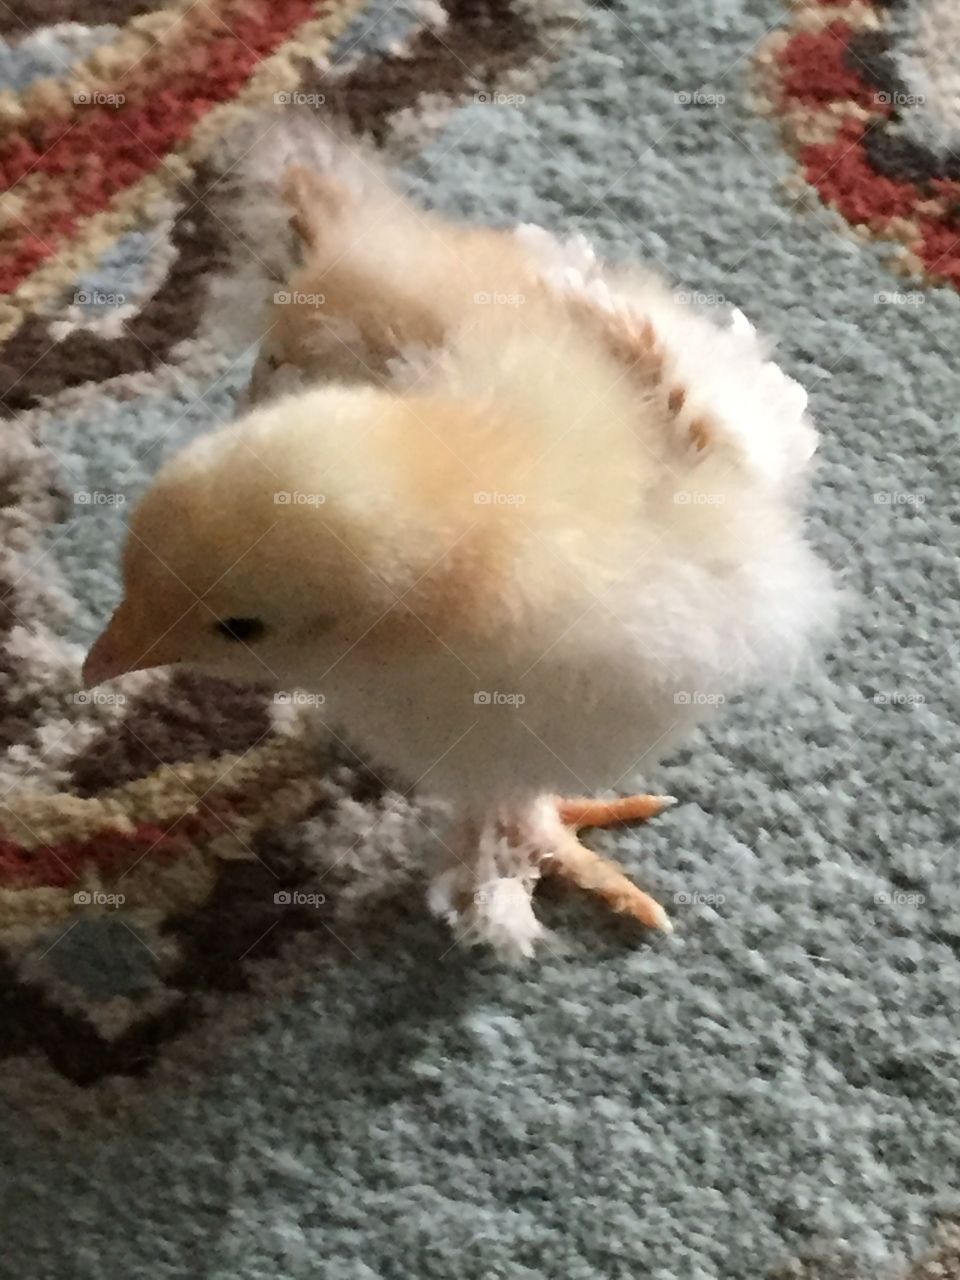 Cute chick on rug